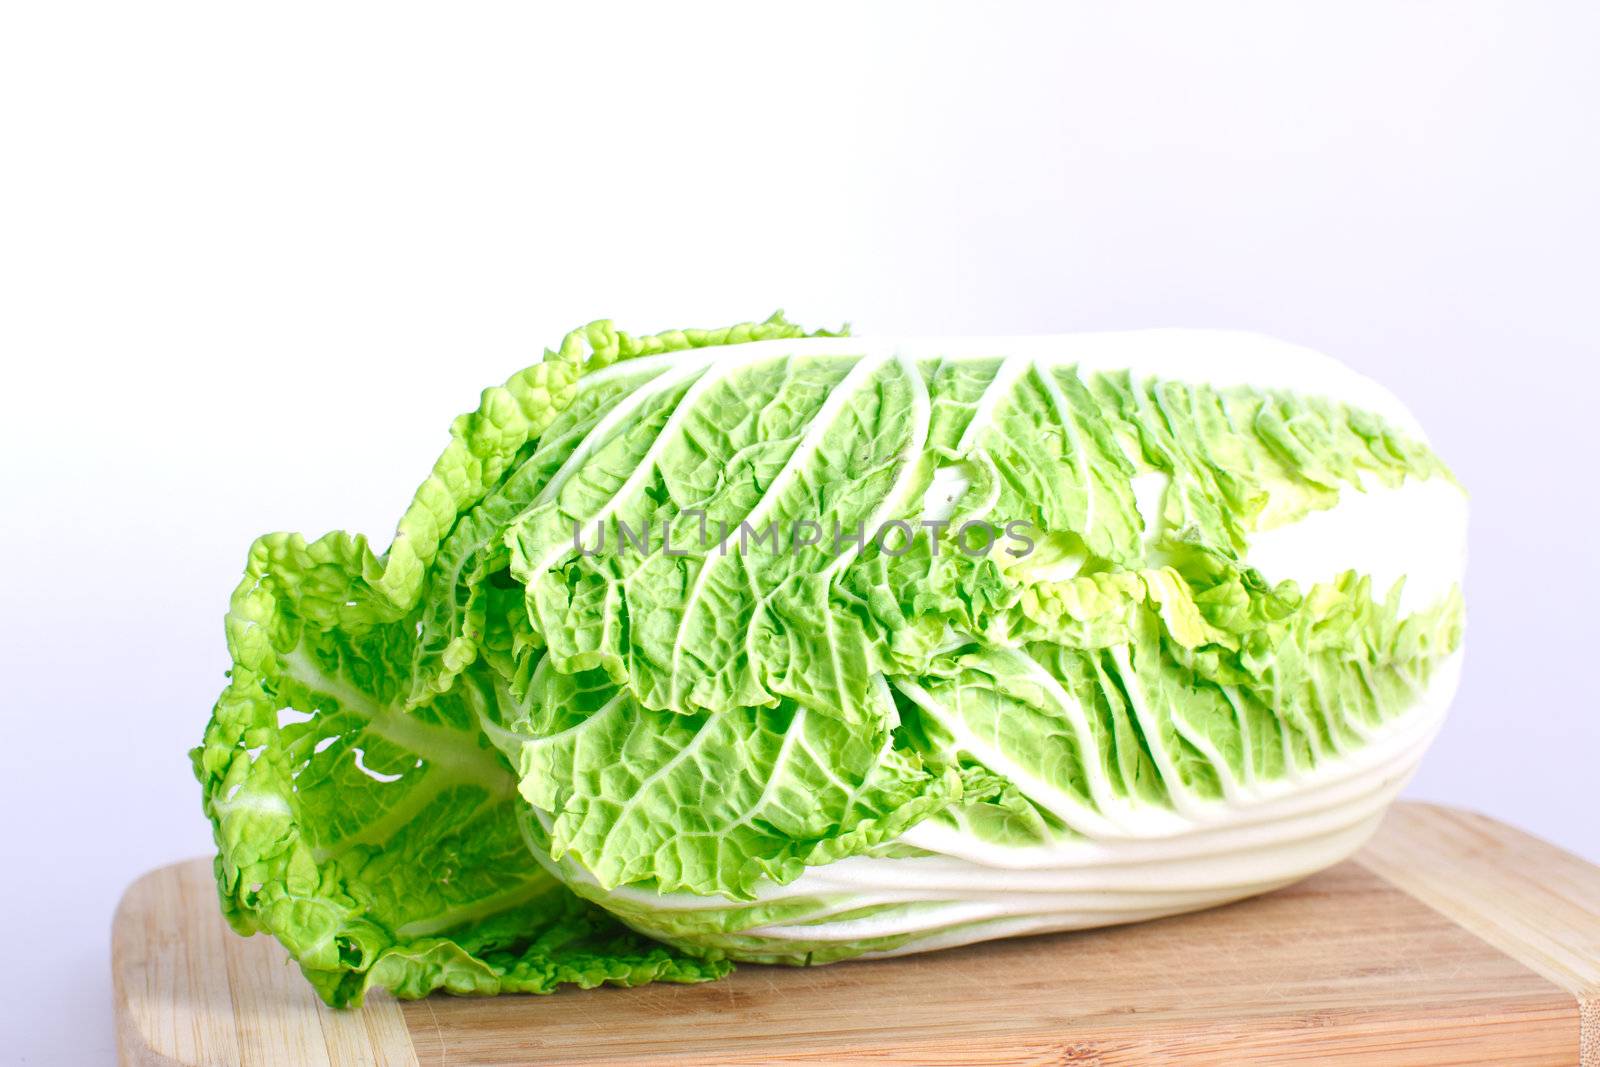 Fresh cabbage on the wood desk isolated on the white background